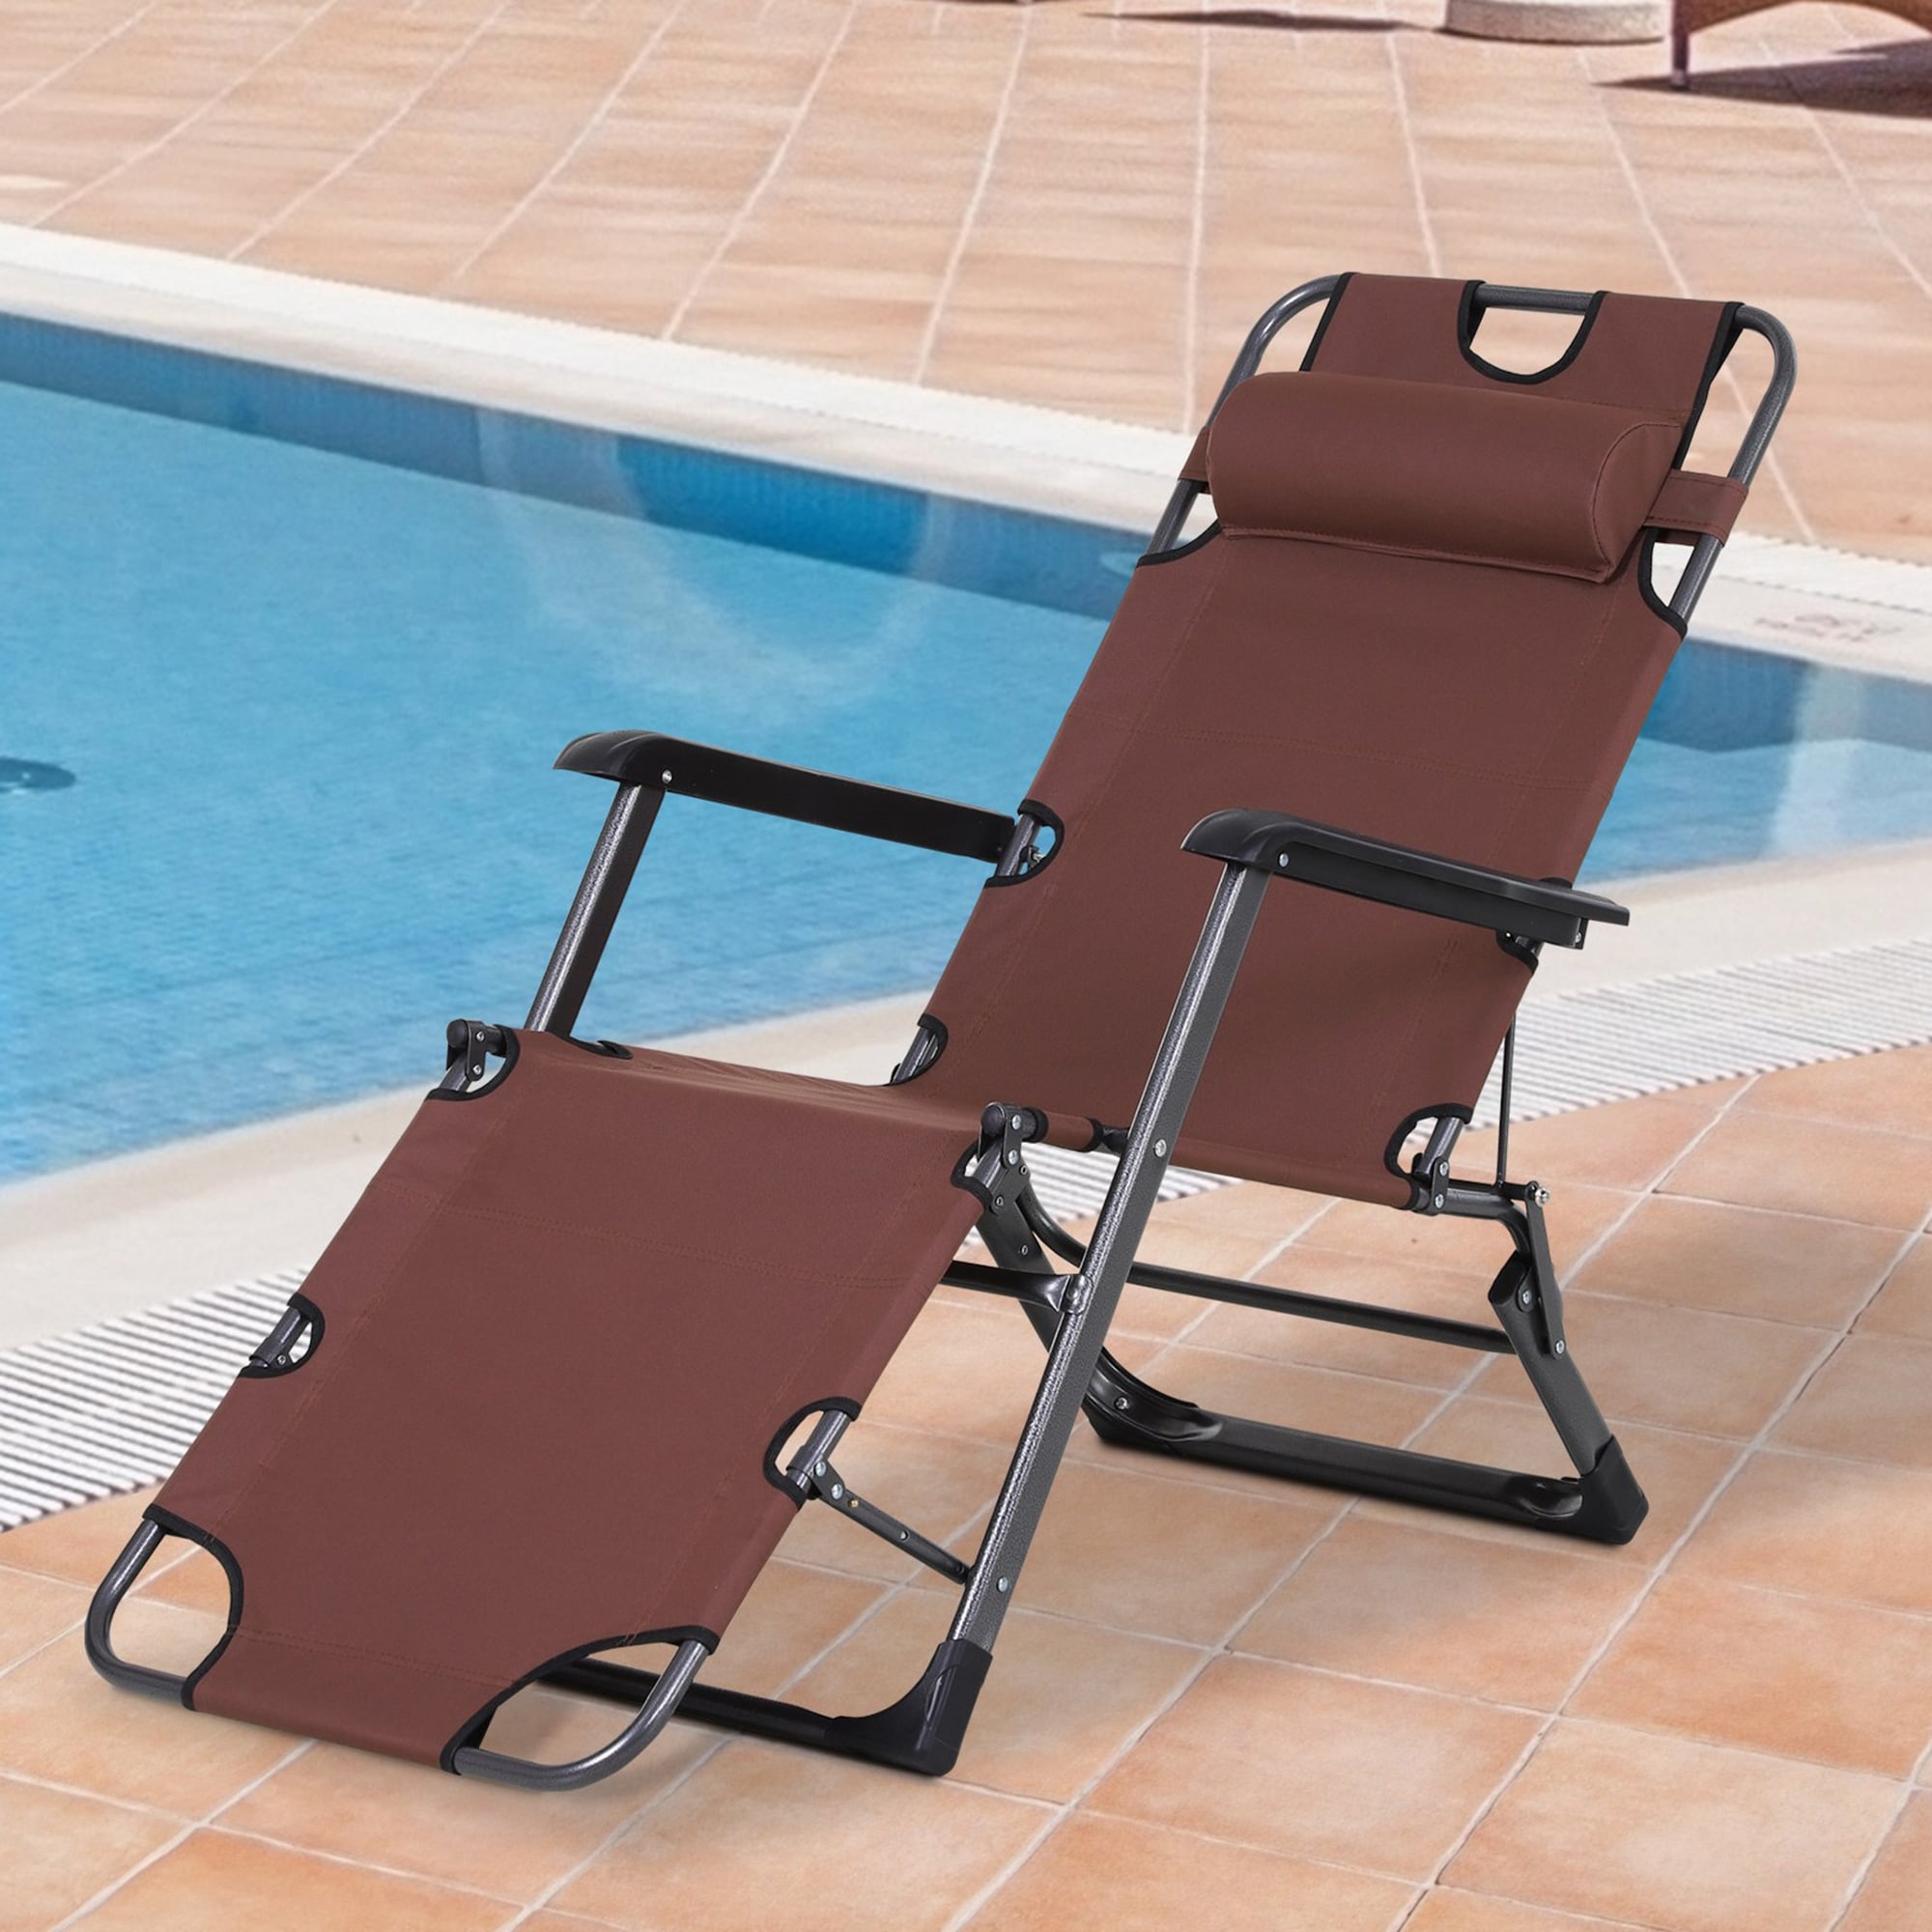 Outsunny 2-in-1 Patio Lounge Chair W/ Pillow  Outdoor Folding Sun Lounger Reclining To 120°/180°  Oxford Fabric  Brown